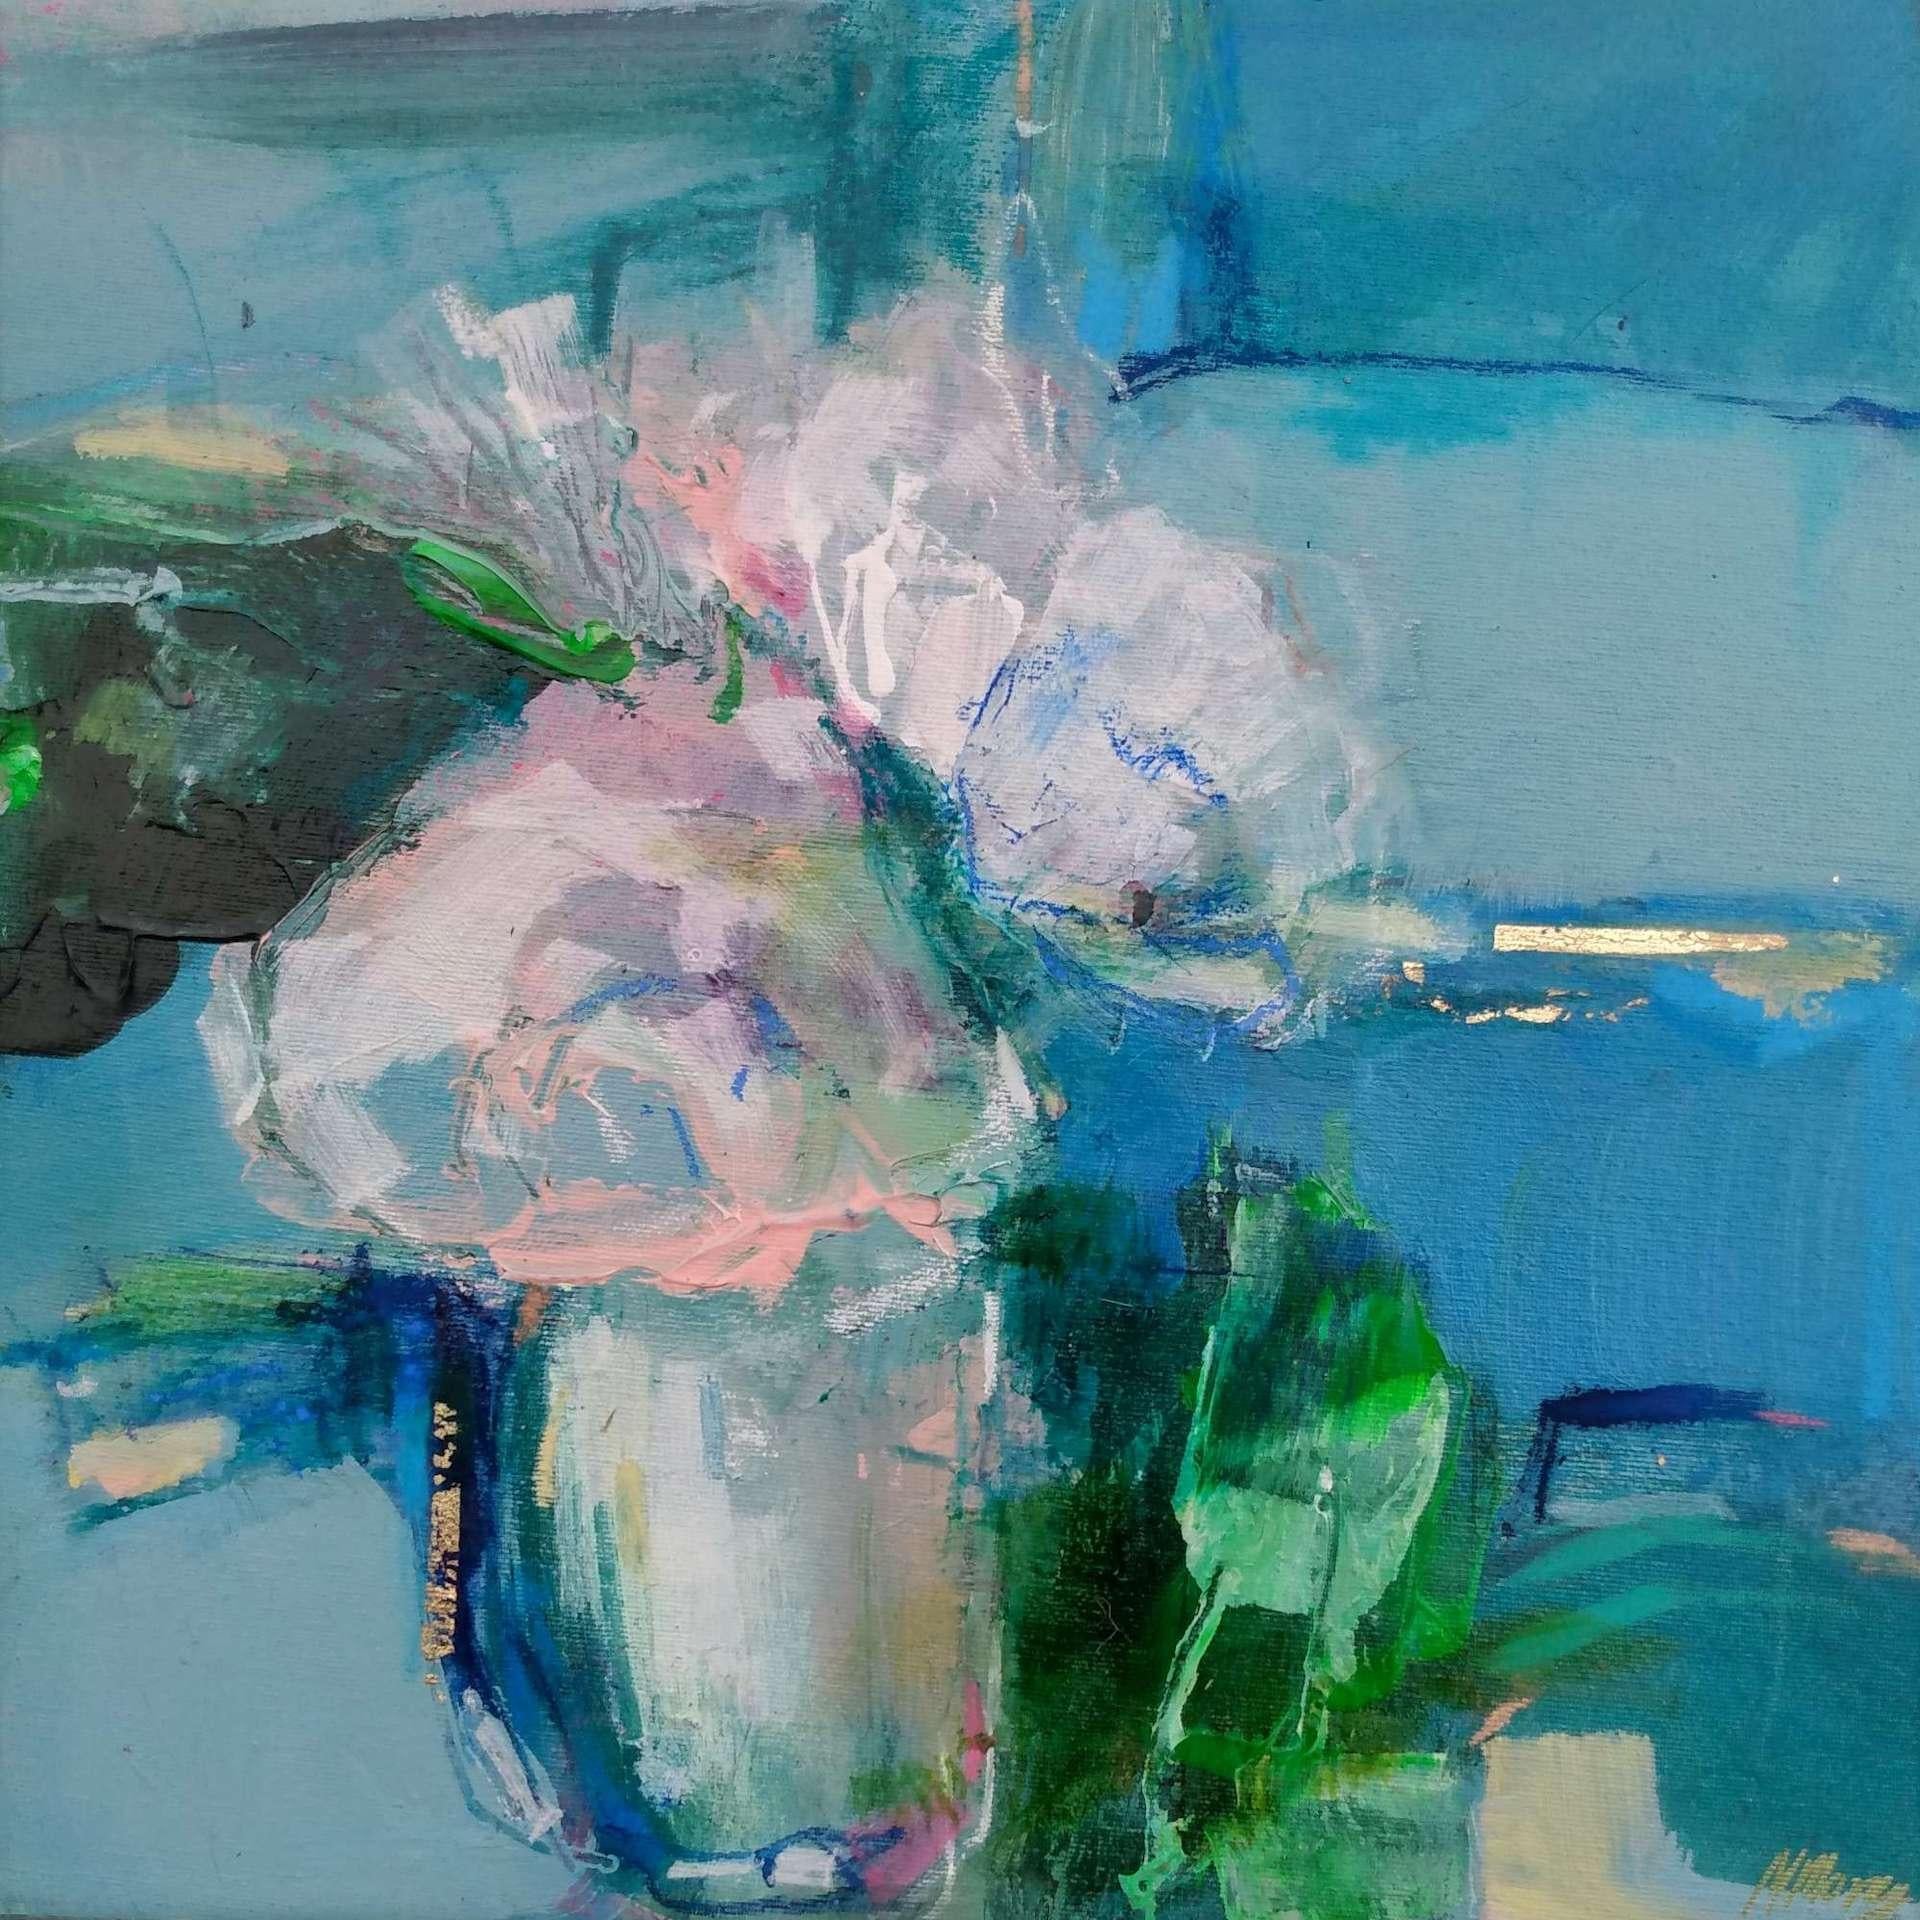 Magdalena Morey
Spring Blooms 1
Contemporary Still Life Painting
Mixed Media on Canvas
Canvas Size: H 30cm x W 30cm x D 3.5cm
Sold Unframed
(Please note that in situ images are purely an indication of how a piece may look.)

Spring Blooms 1 is an